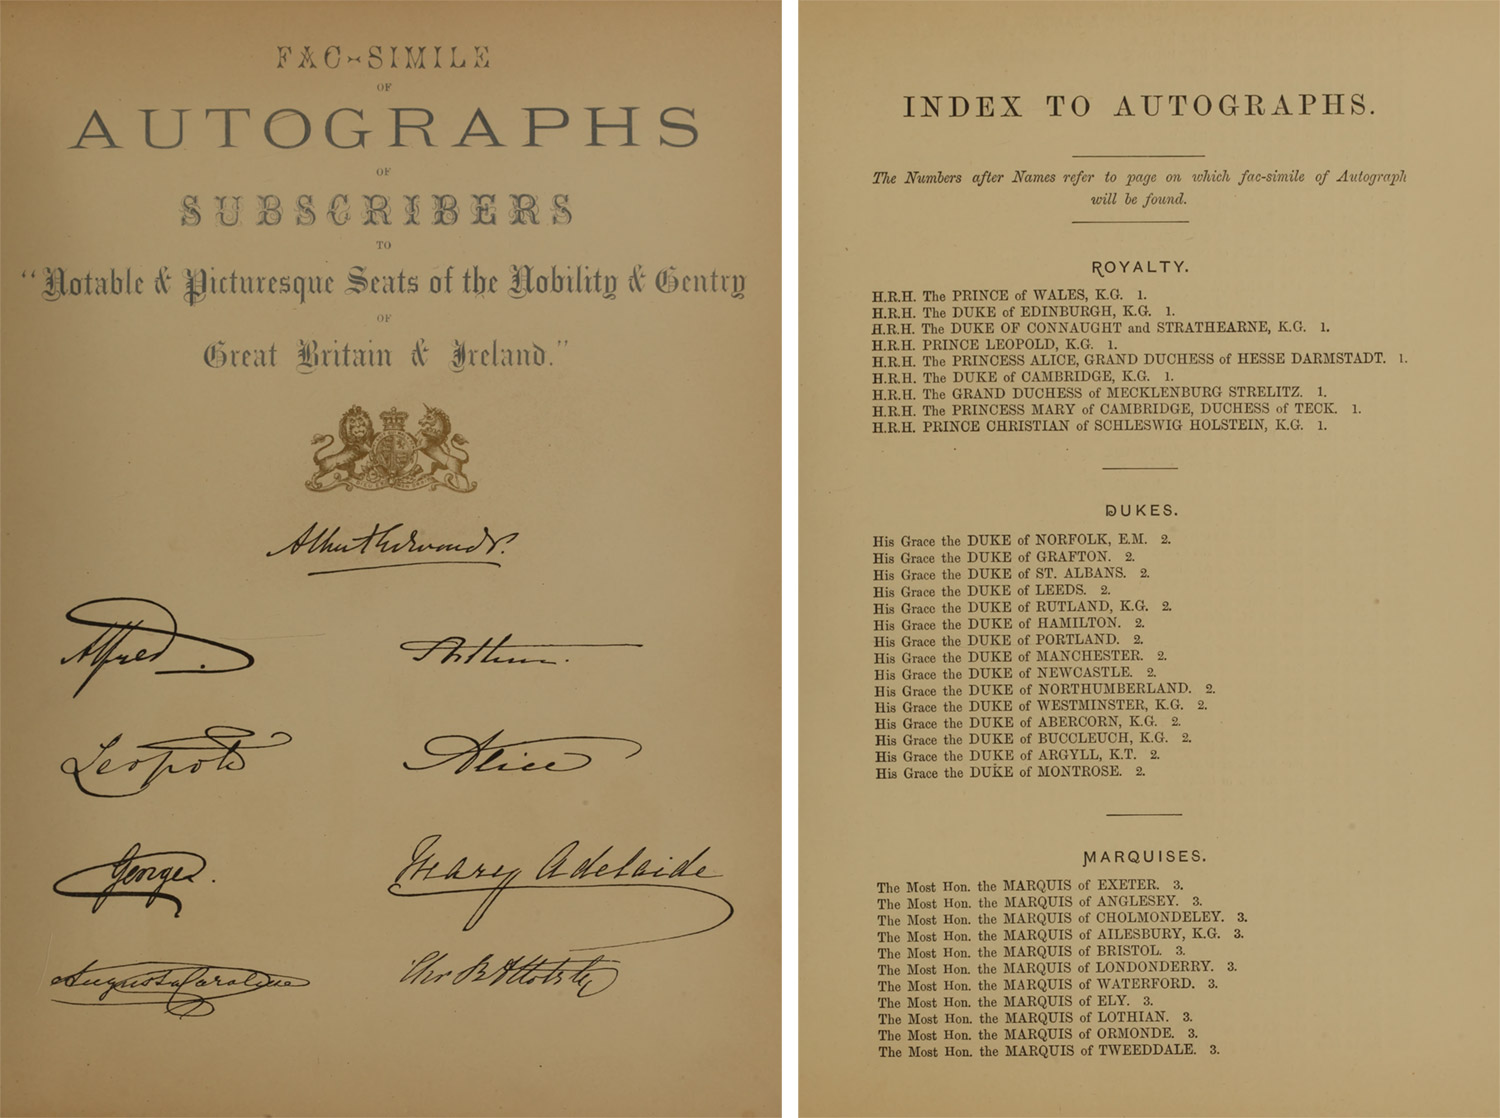 Original scans of signatures of royalty